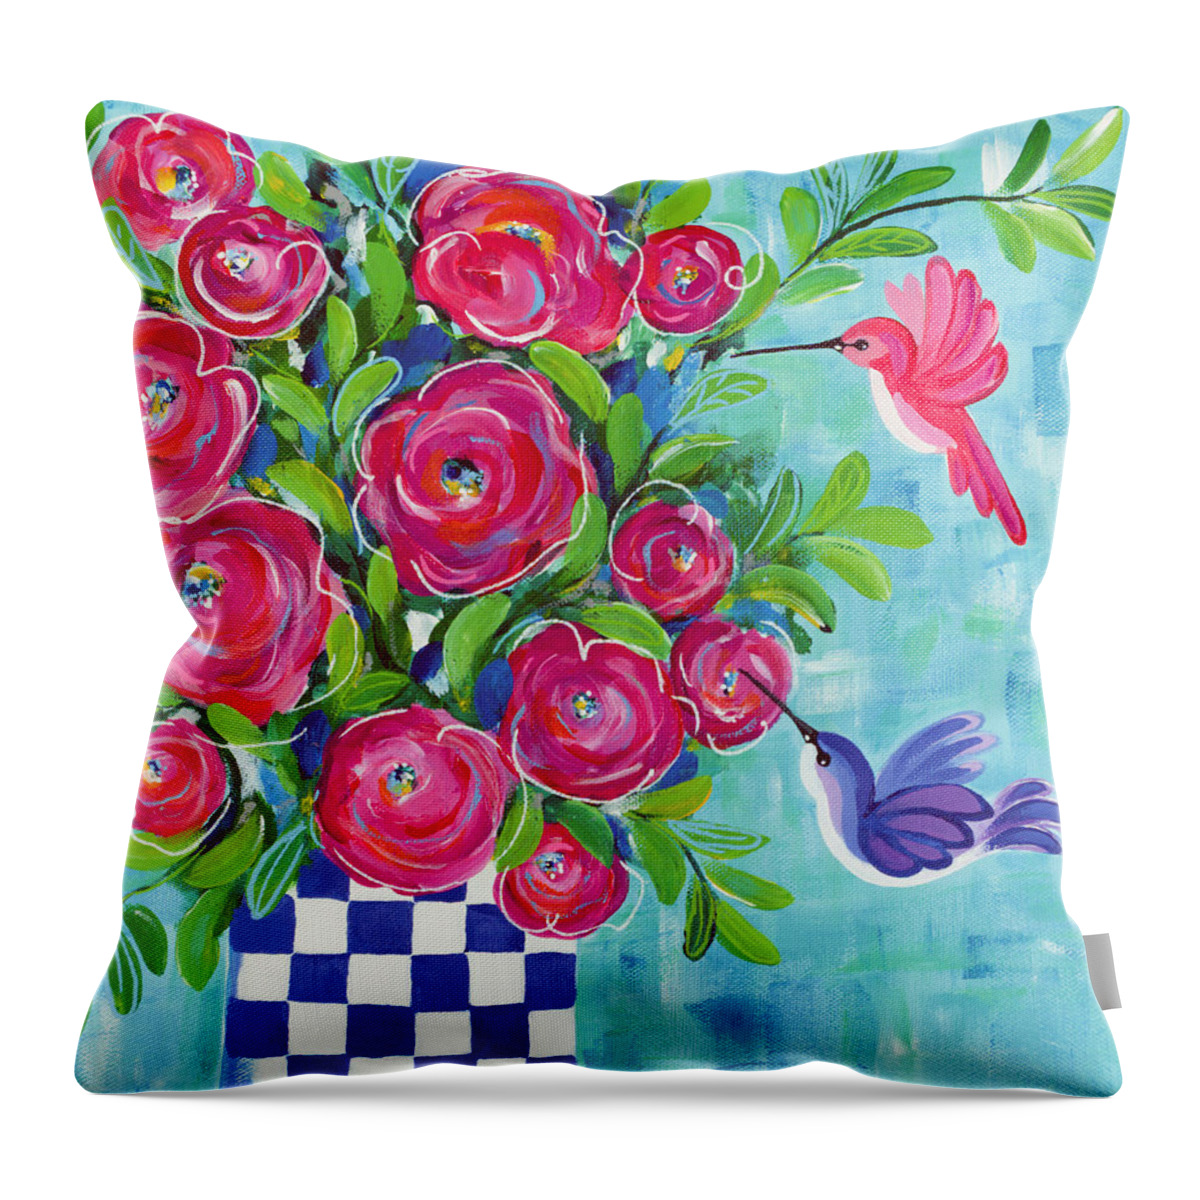 Hummingbird Throw Pillow featuring the painting Better Together by Beth Ann Scott